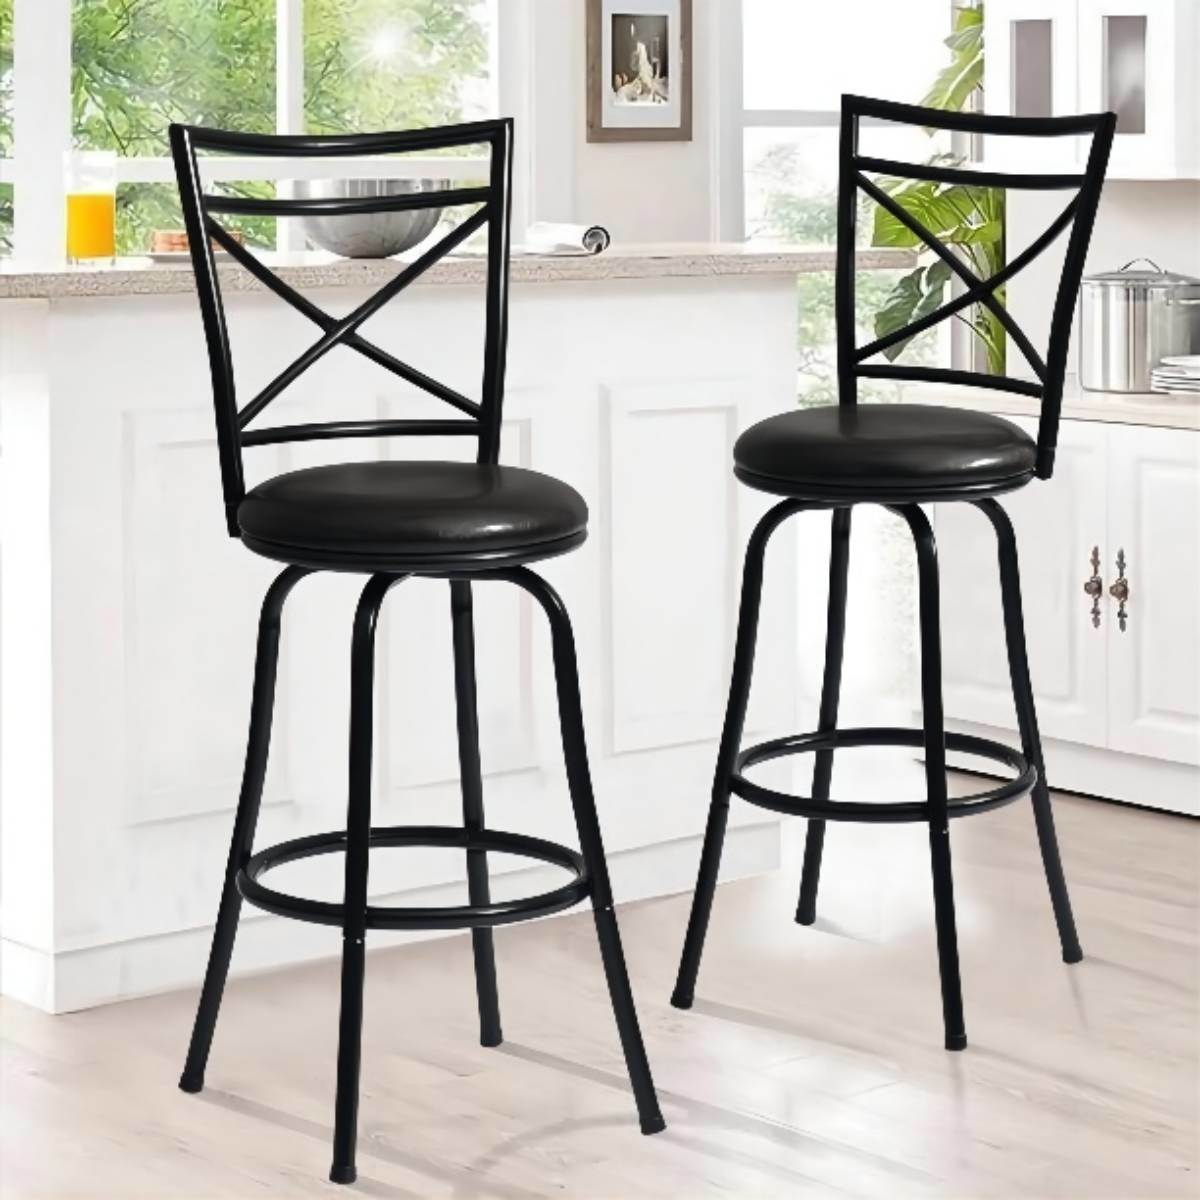 Vintage Industrial Counter Height Bar Stools Set of 2, Swivel Barstools with Metal Back for Kitchen Island, 26 Inch Height Round Seat